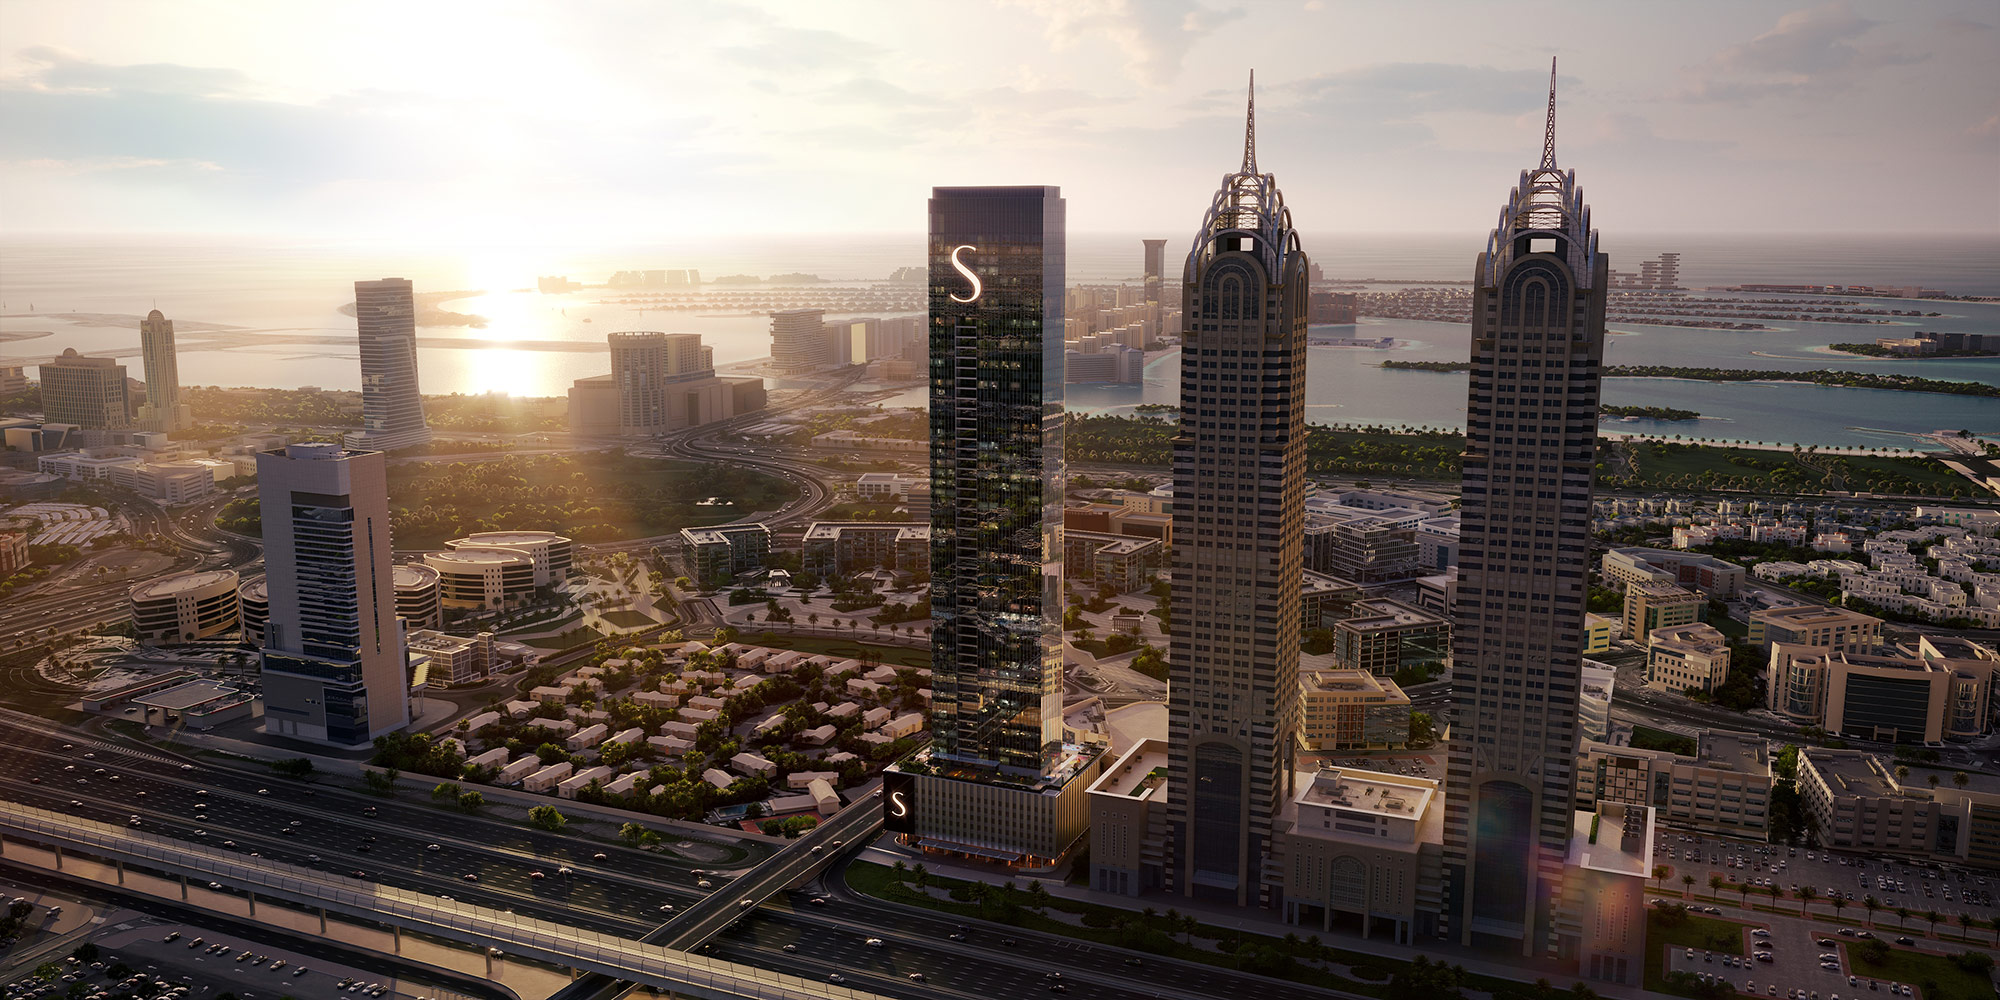 Sobha The S Tower is a 751-ft luxury residential building in Al Sufouh.